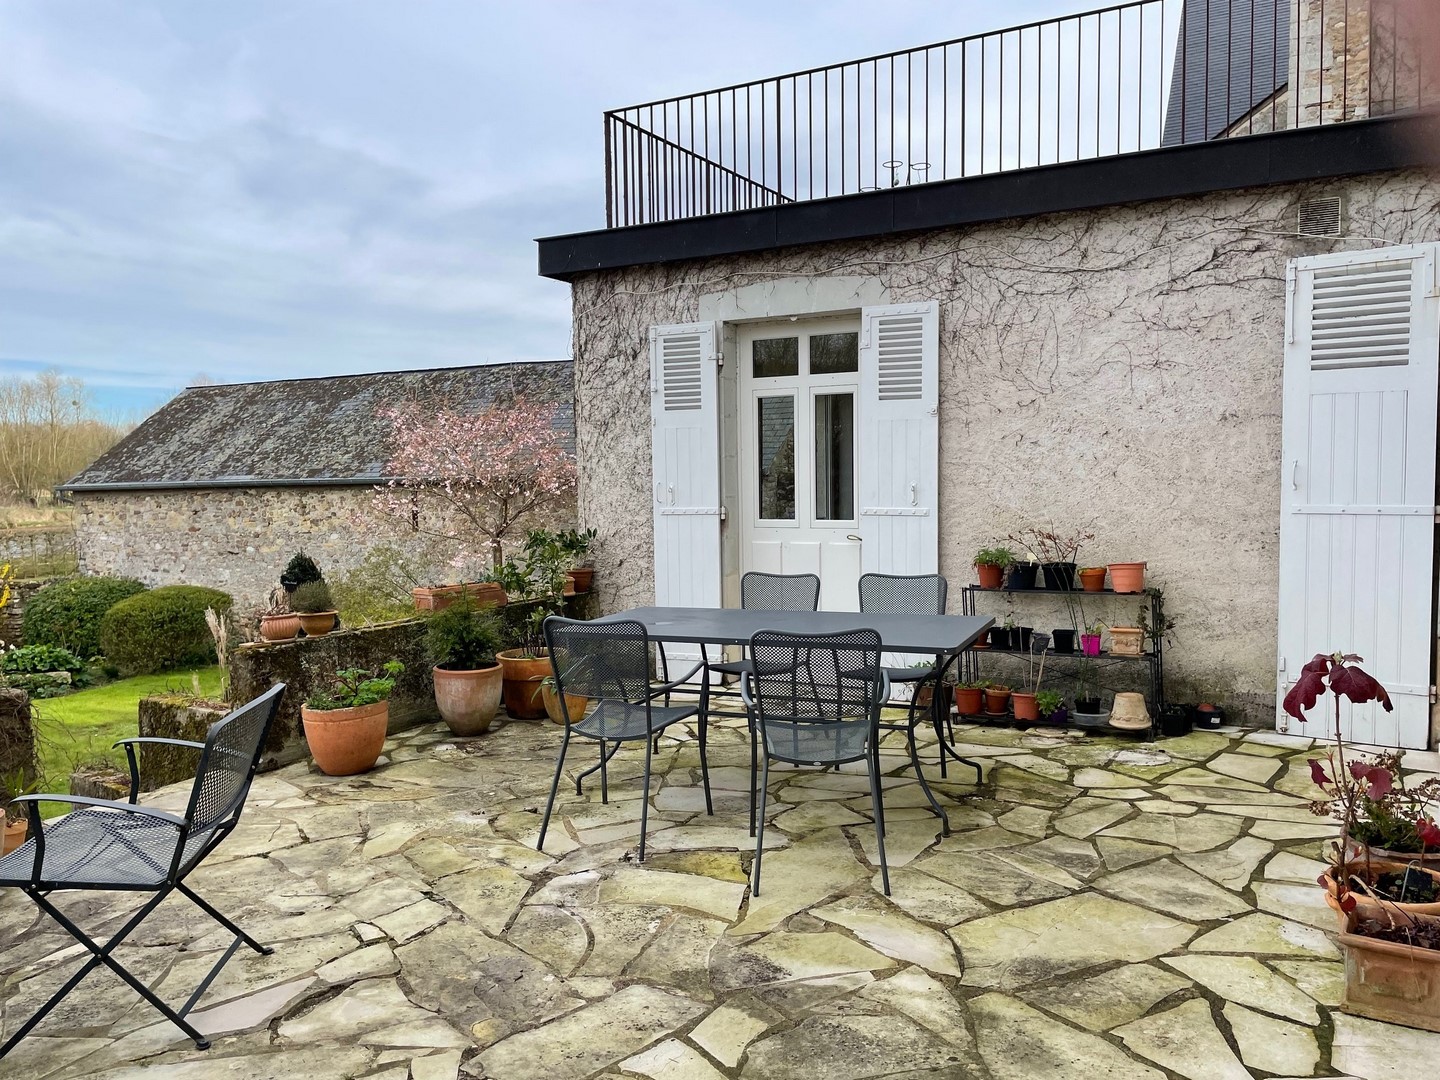 PRIORY HOUSE XVIIth and XVIIIth – 35 min Angers – 220m² – Outbuilding – Very nice landscaped garden – river view